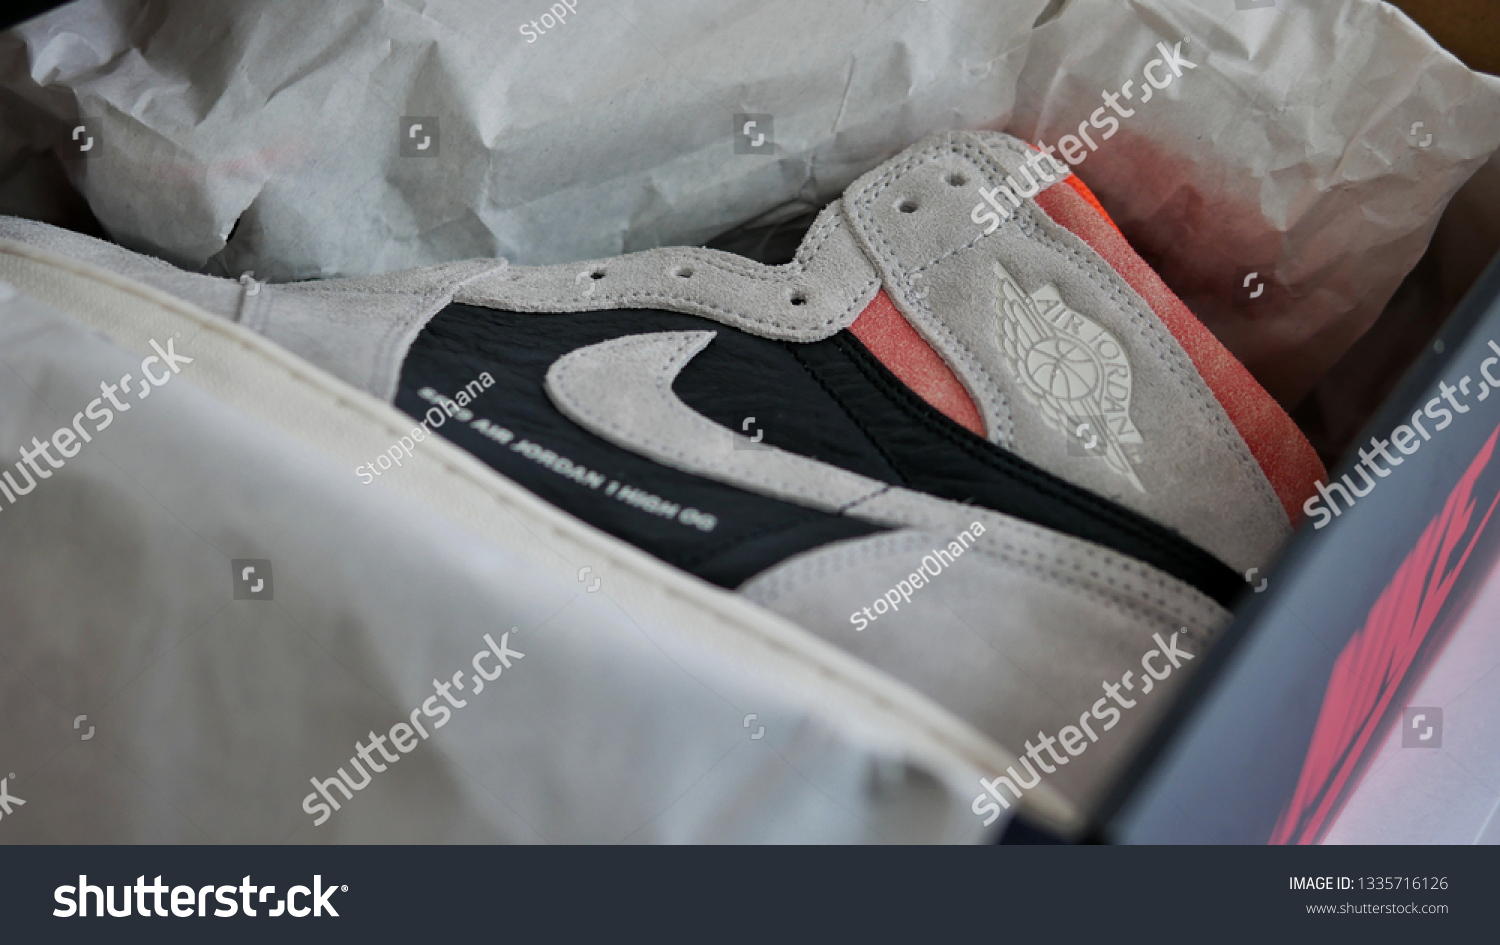 350 Nike Chicago Images, Stock Photos & Vectors | Shutterstock